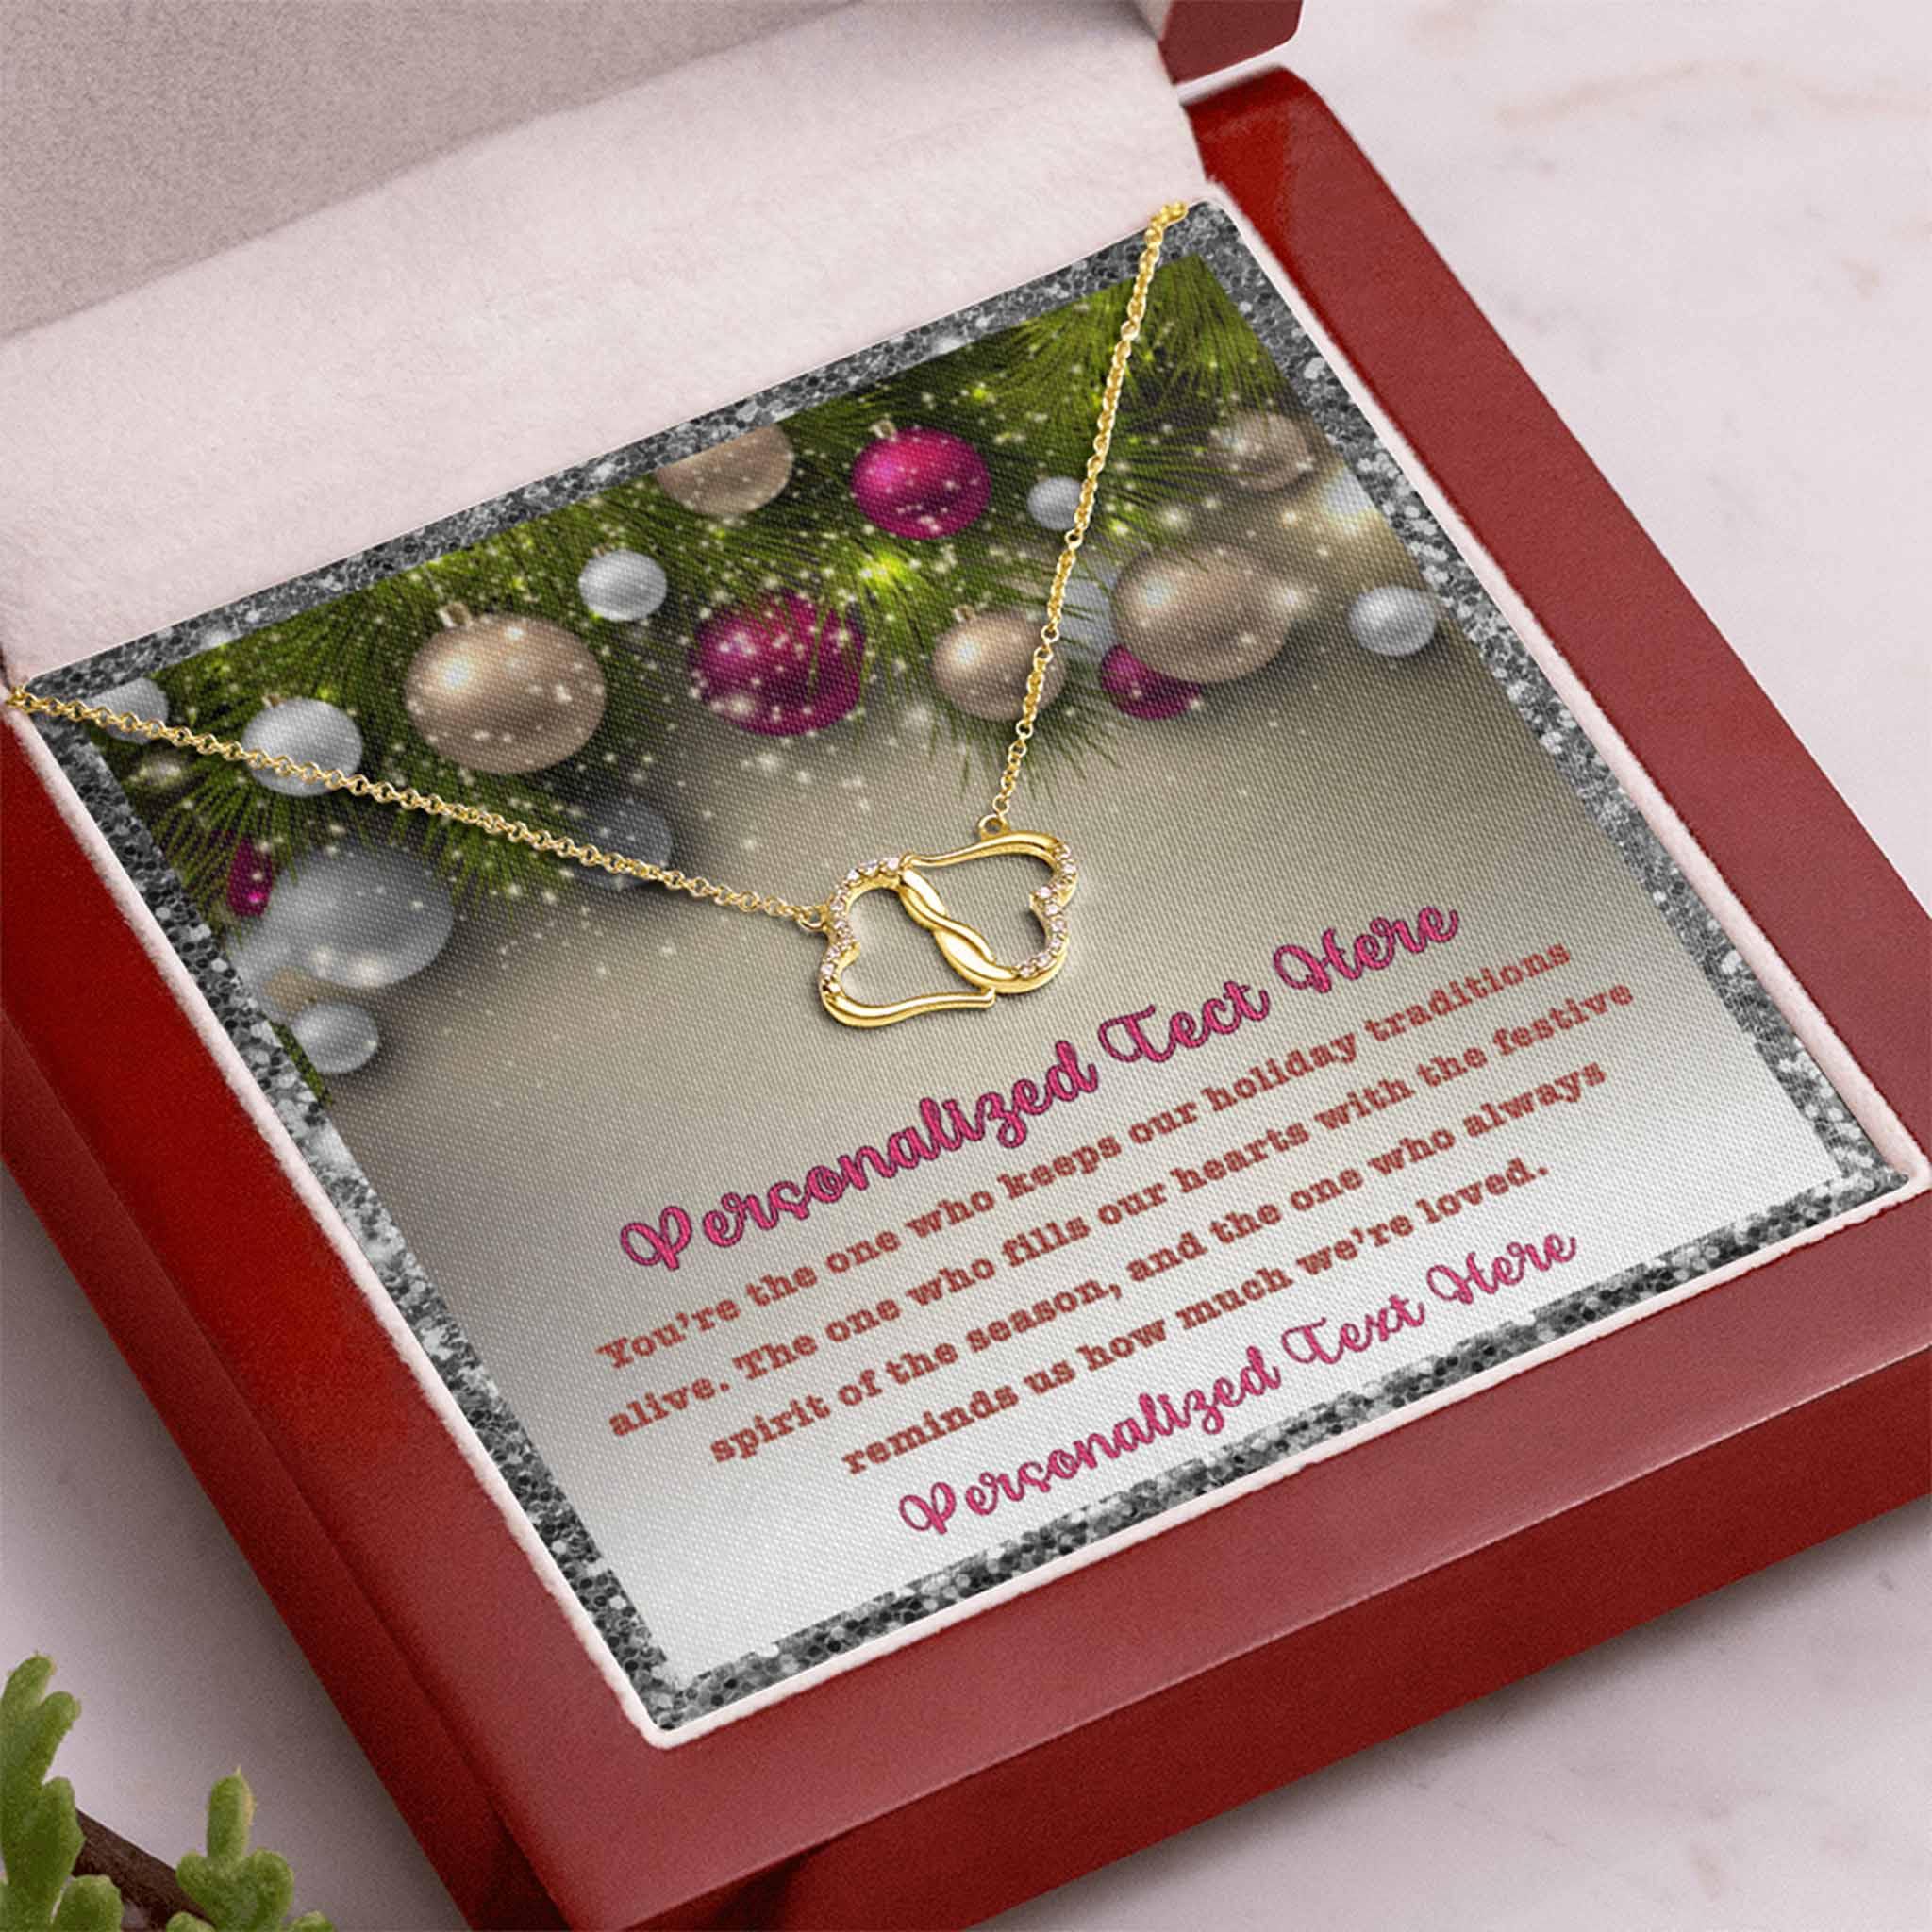 Everlasting Love Necklace Grandmother Christmas How Much We're Loved Personalized Insert CardCustomly Gifts